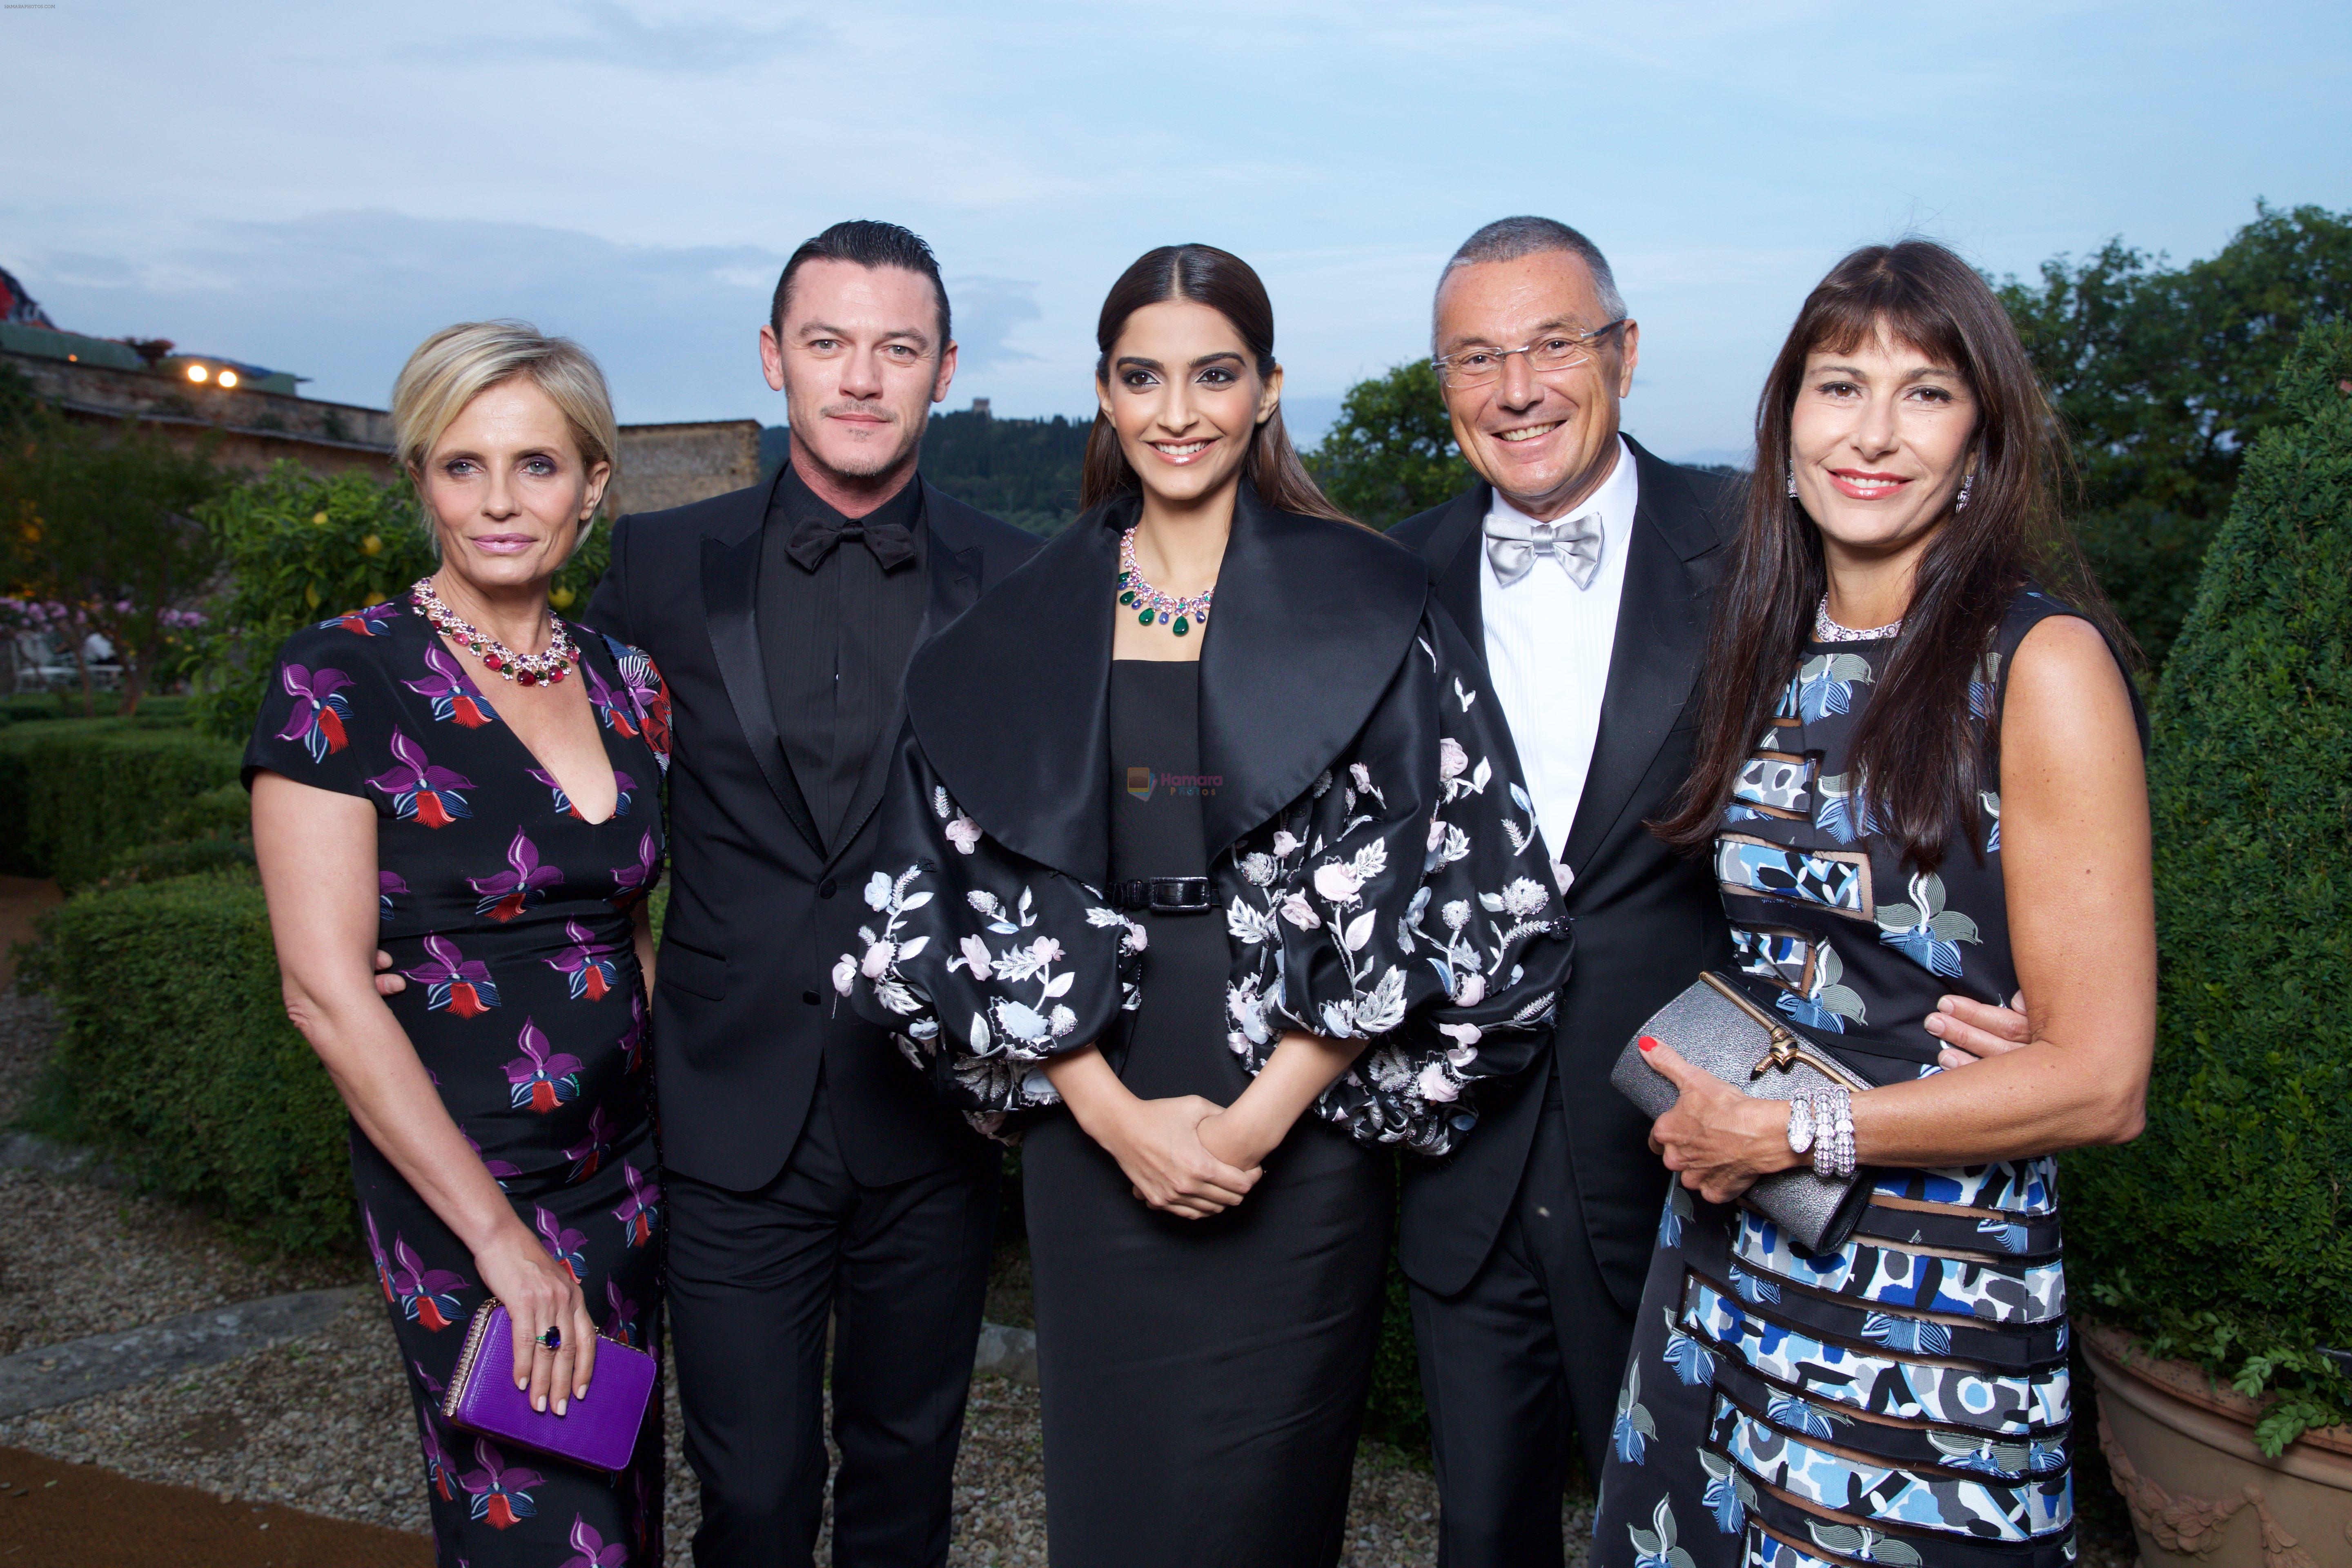 Sonam Kapoor unveiled Bulgari's new High Jewellery collection inspired by the art of the Italian gardens in Villa Di Maiano, Florence on 14th June 2015